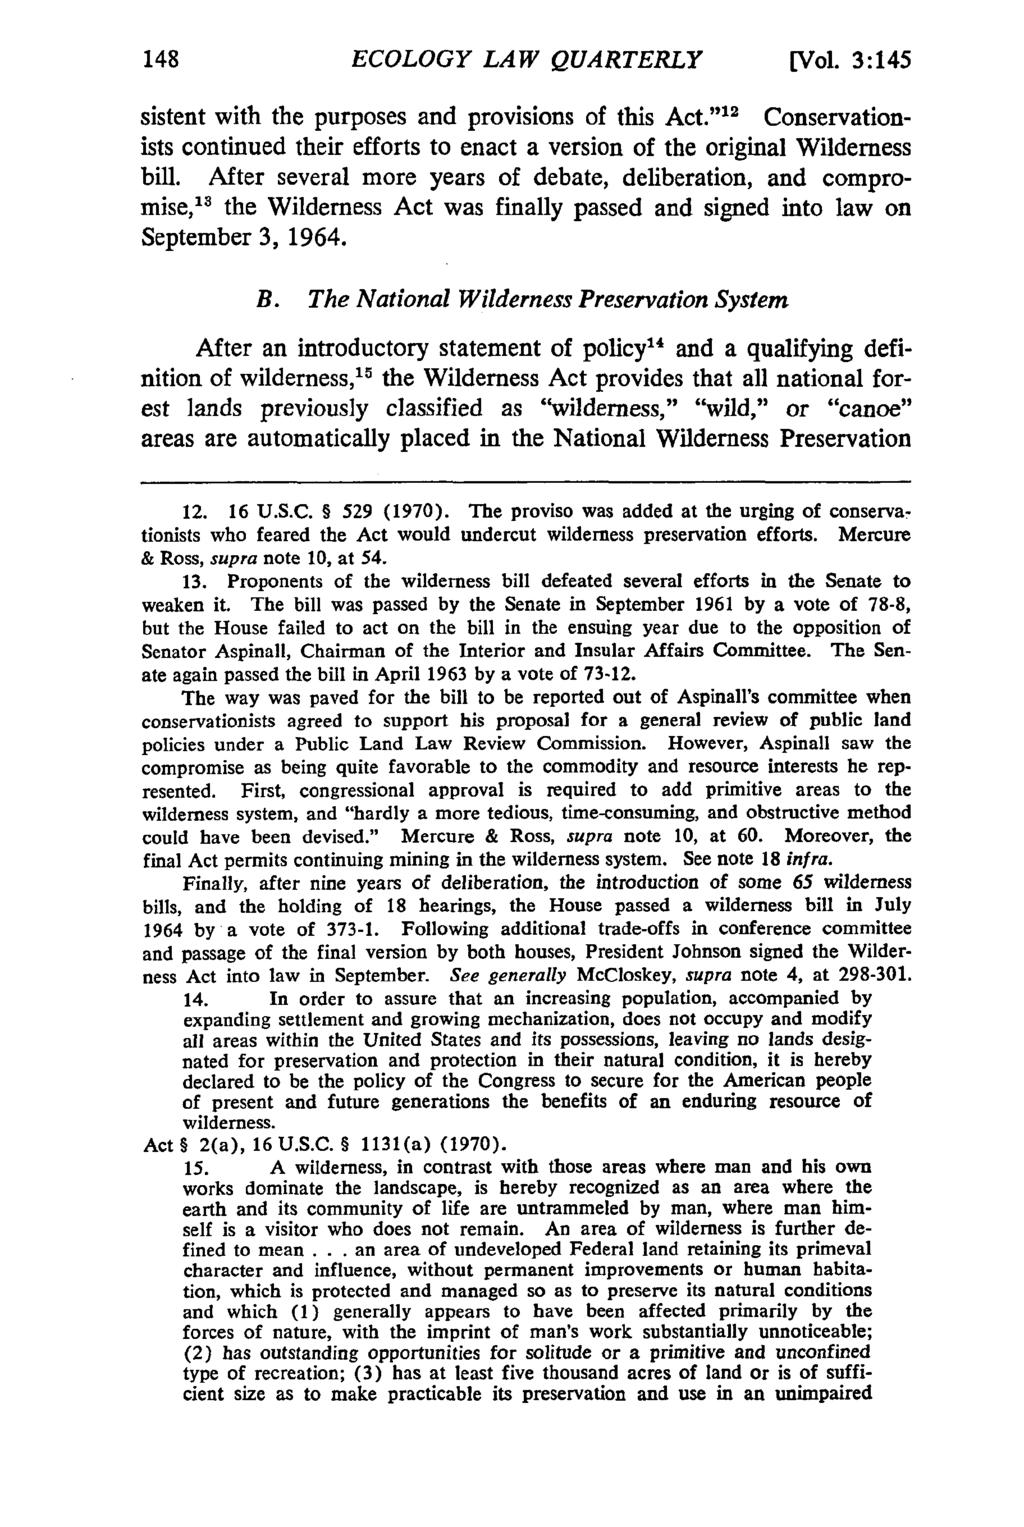 ECOLOGY LAW QUARTERLY [Vol. 3:145 sistent with the purposes and provisions of this Act." 1 2 Conservationists continued their efforts to enact a version of the original Wilderness bill.